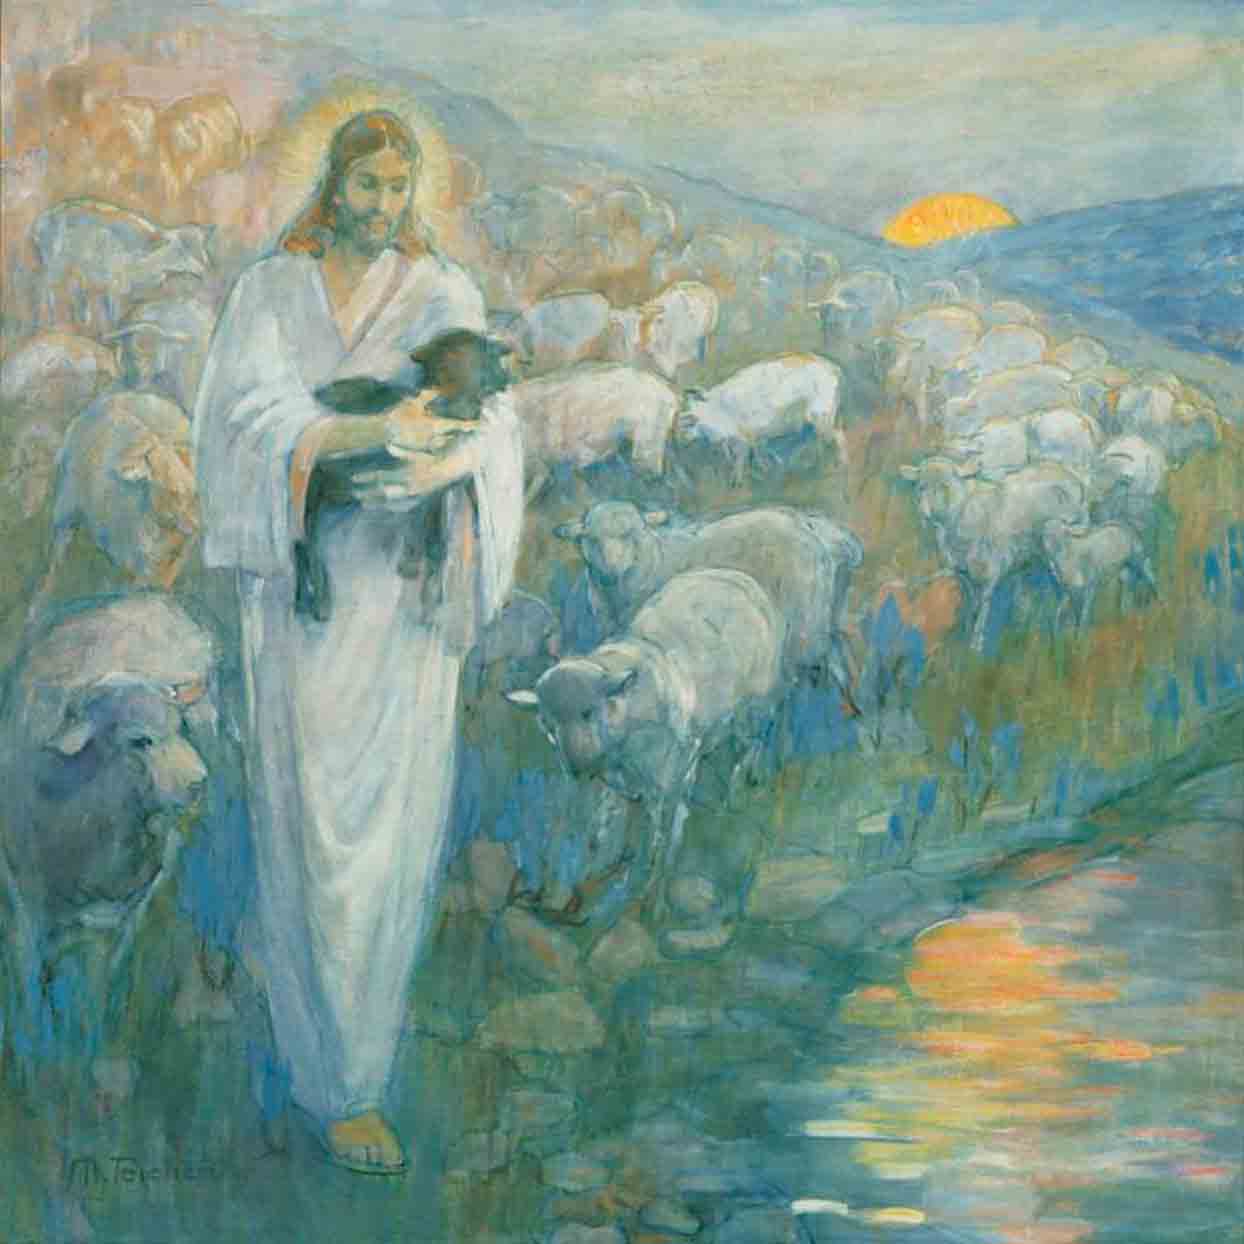 Rescue of the Lost Lamb painting